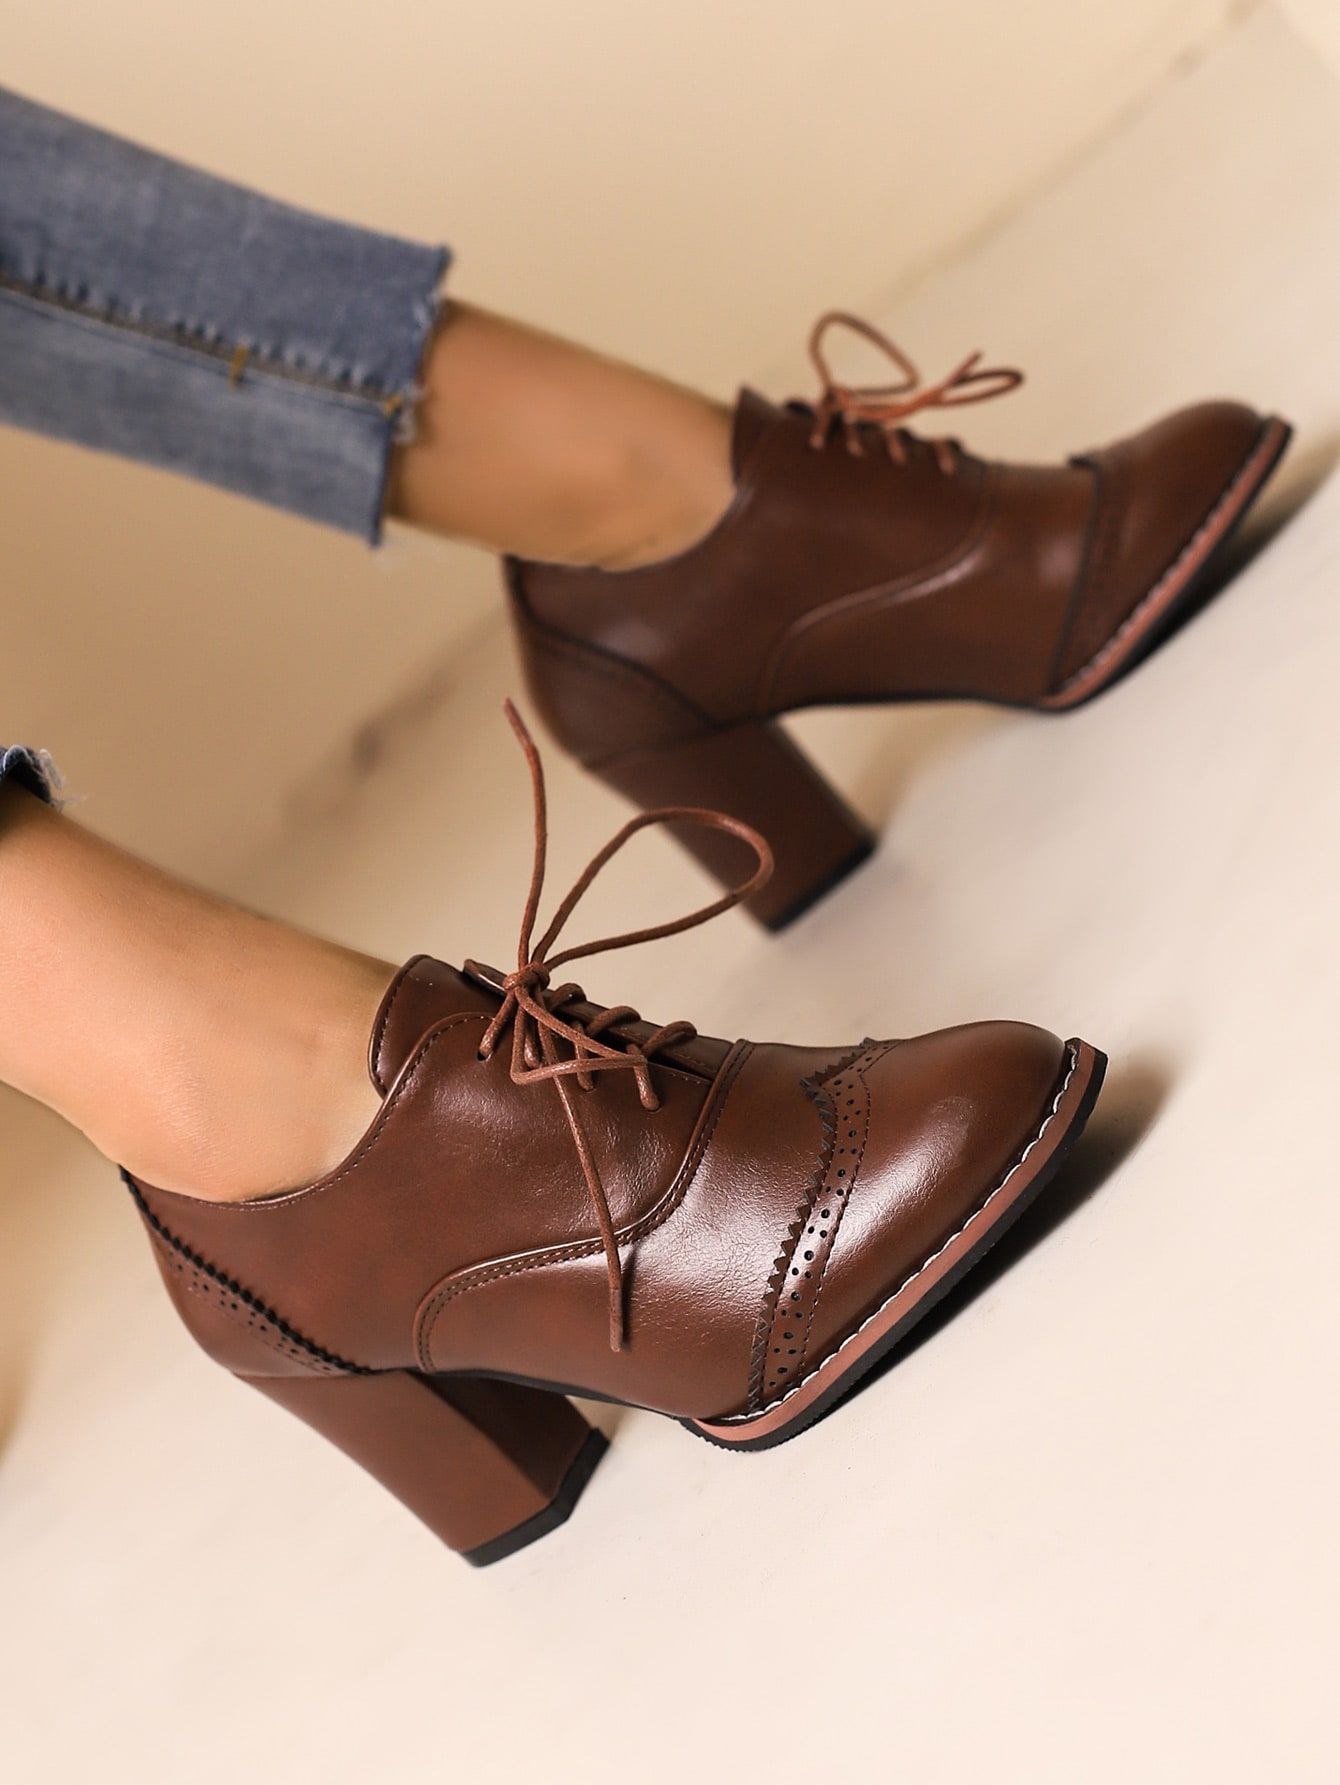 How to Wear Brown Oxford Shoes: Best 13 Stylish Outfit Ideas for Women